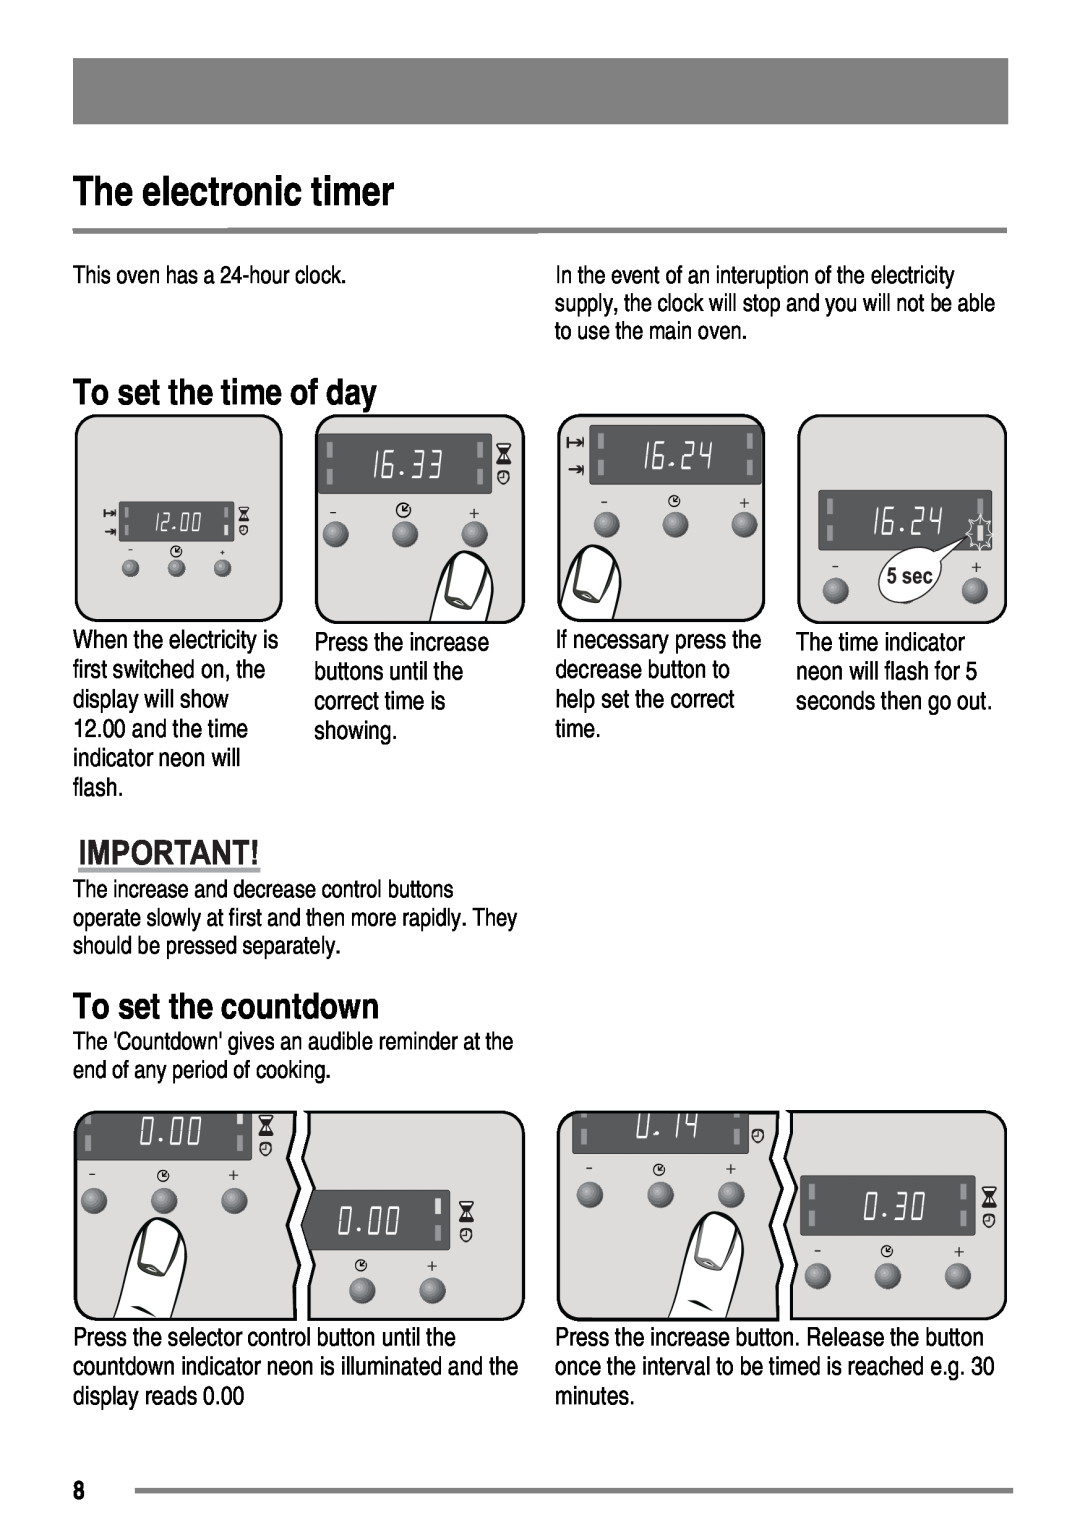 Zanussi ZKC5030 user manual The electronic timer, To set the time of day, To set the countdown 